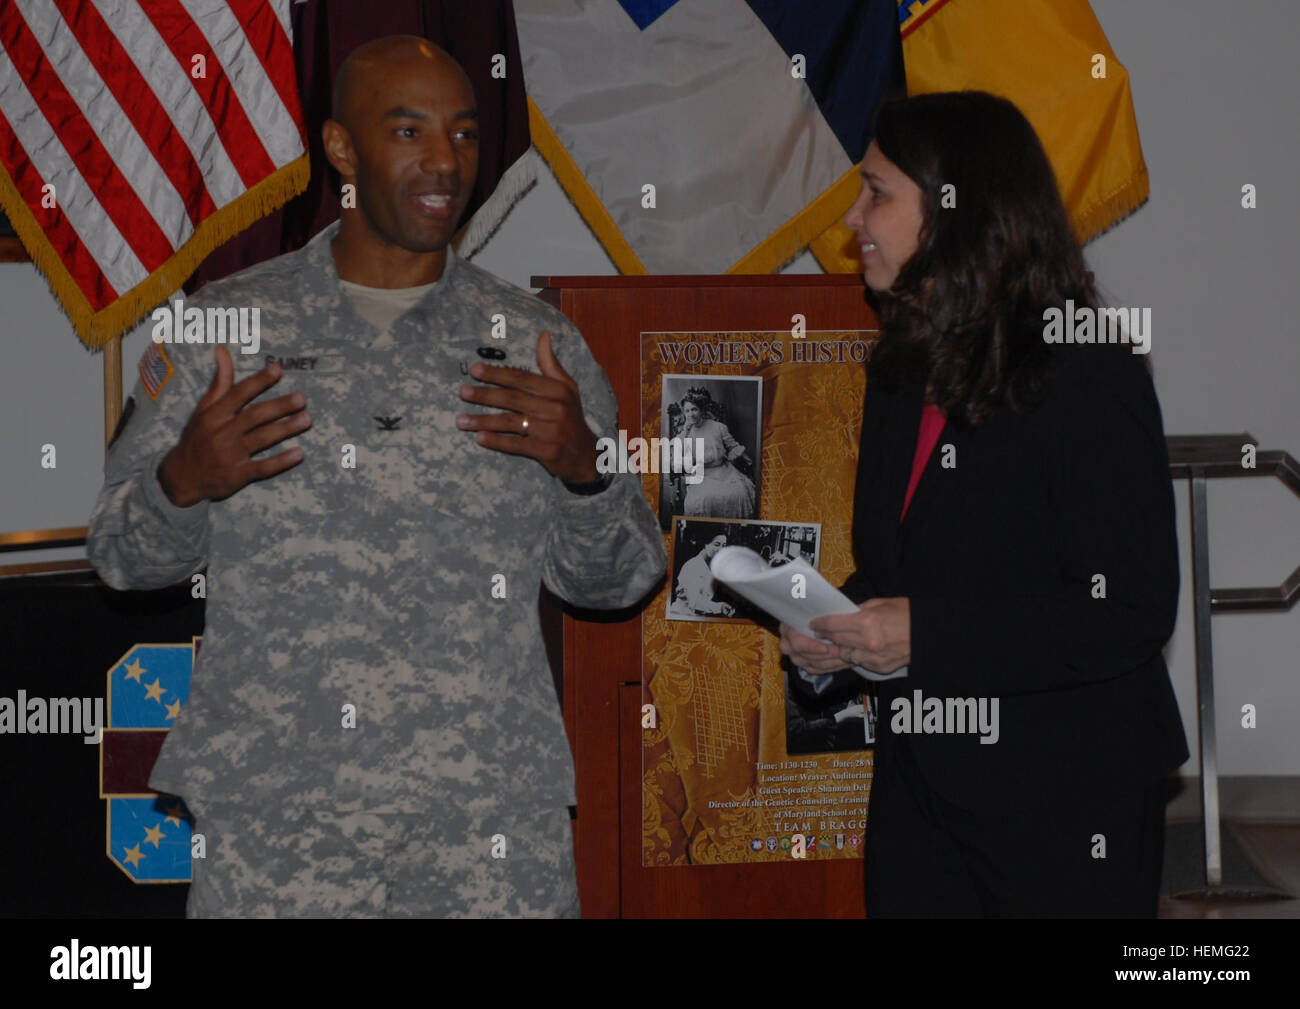 Col. Sean A. Gainey, 108th Air Defense Artillery Brigade commander, speaks with Ms. Shannan M. Dixon, director of the masters in genetic counseling training program, University of Maryland, Baltimore, during the Women's History Month Observance May 28 in Weaver Auditorium, Womack Army Medical Center. The theme this year was Celebrating Women in Science, Technology, Engineering and Mathematics. 108th ADA hosts Fort Bragg Women%%%%%%%%E2%%%%%%%%80%%%%%%%%99s History Month Observance 905742 Stock Photo